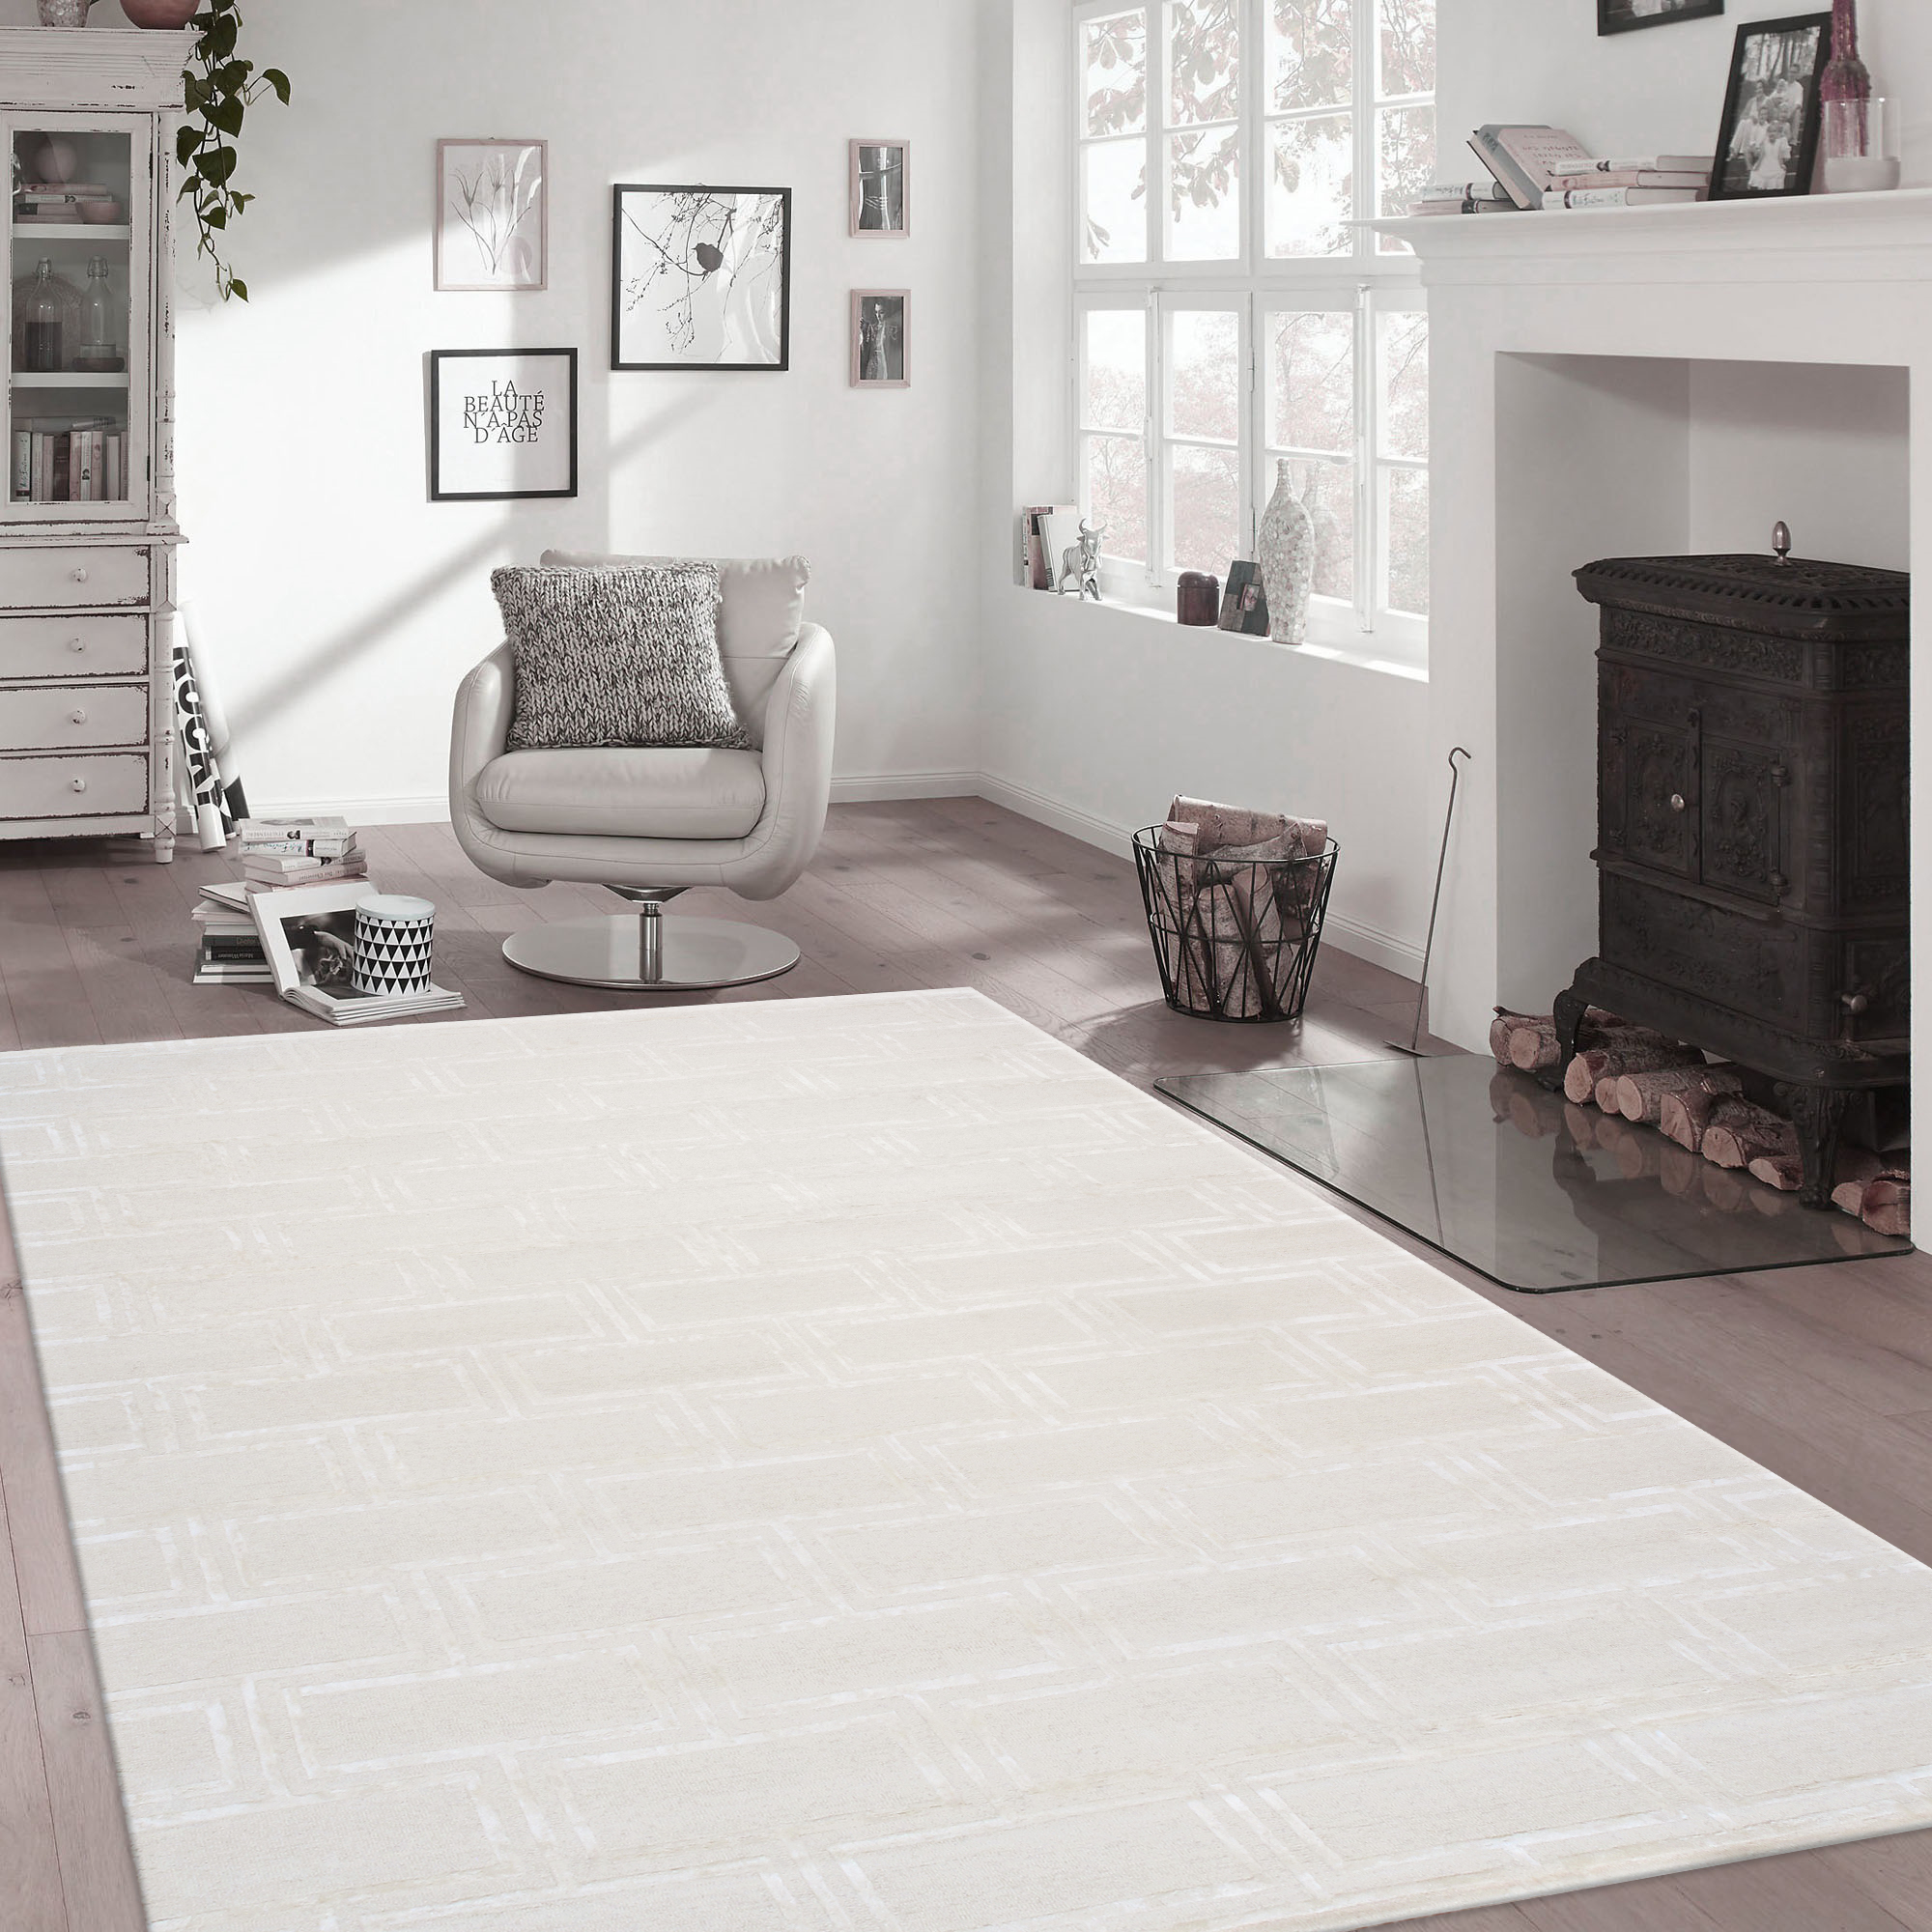 Pasargad Home Edgy Collection Hand-Tufted Bamboo Silk & Wool Area Rug, 7' 9" X 9' 9", Ivory - image 5 of 5